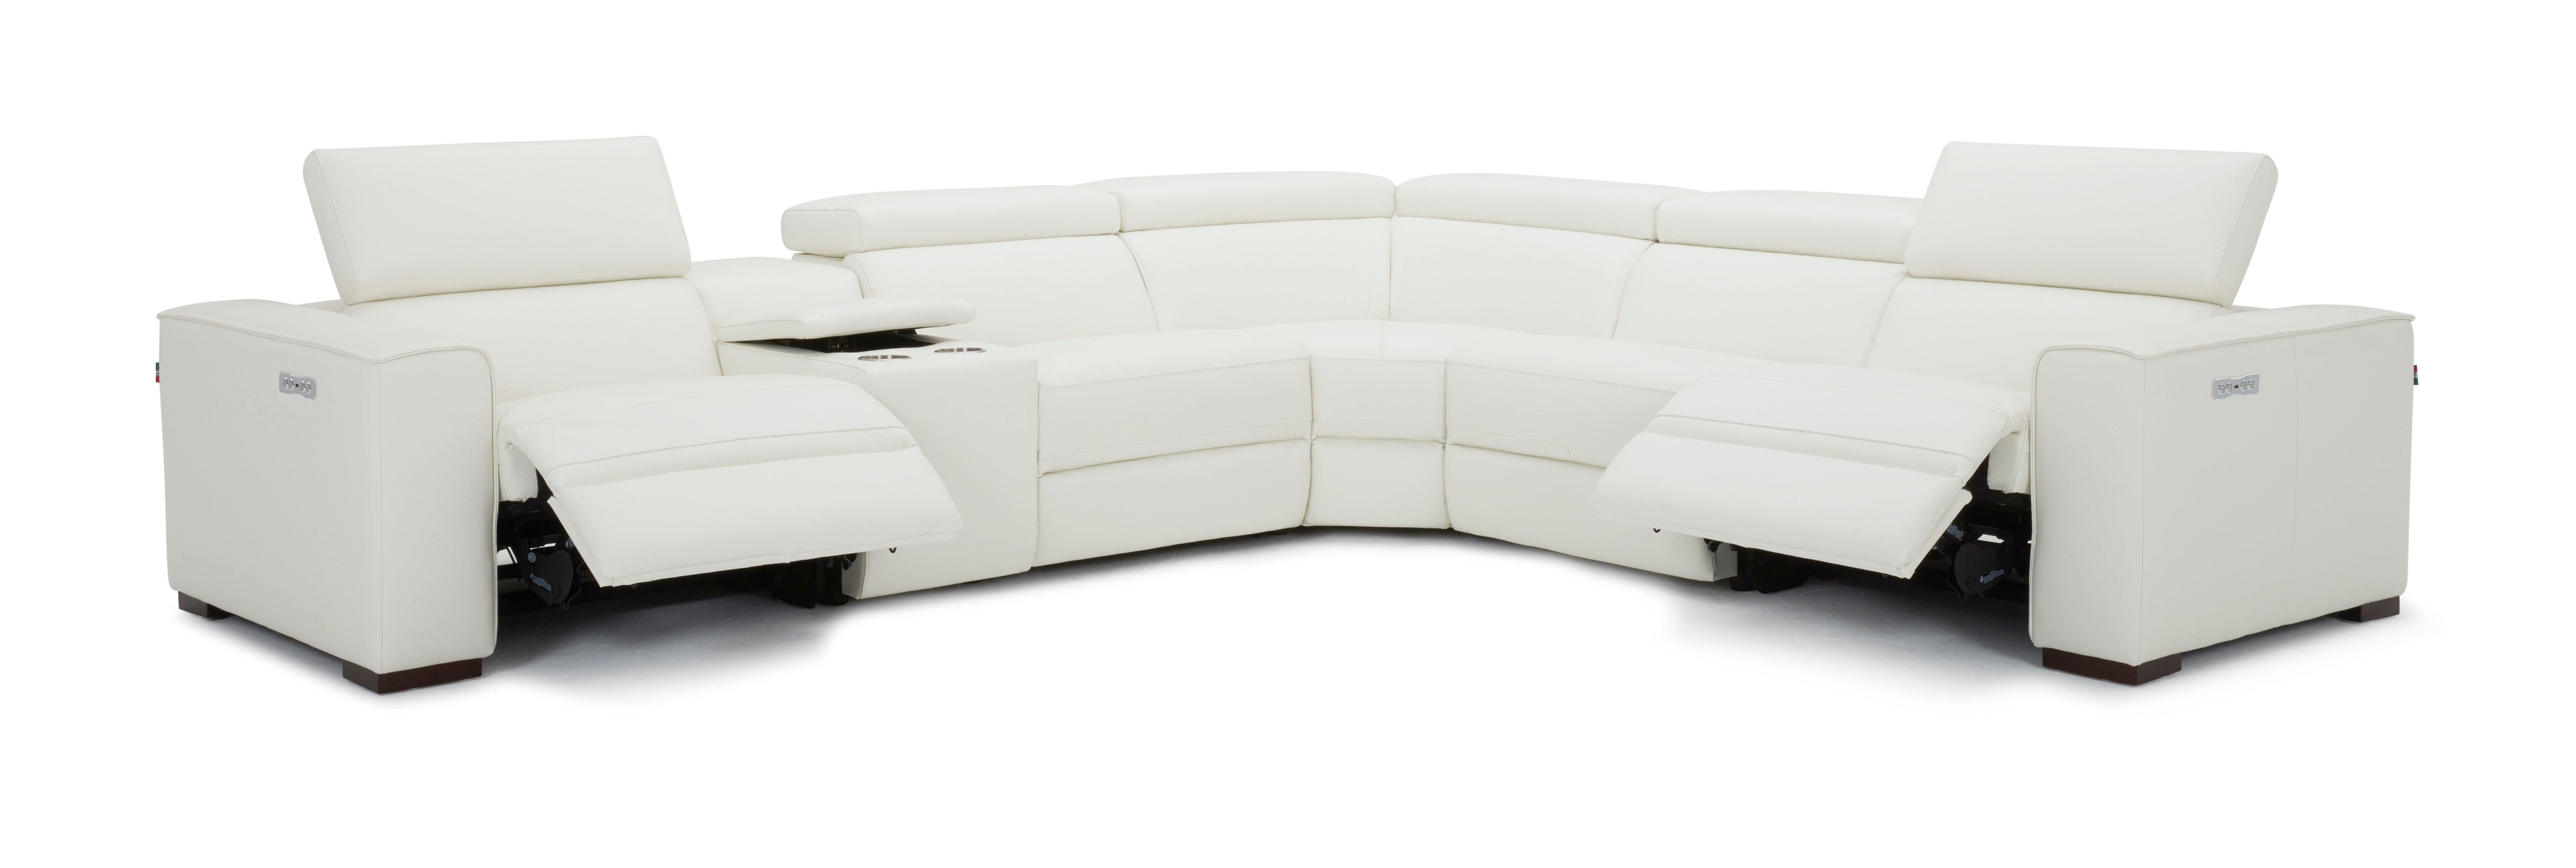 Picasso 6pc Motion Sectional In White